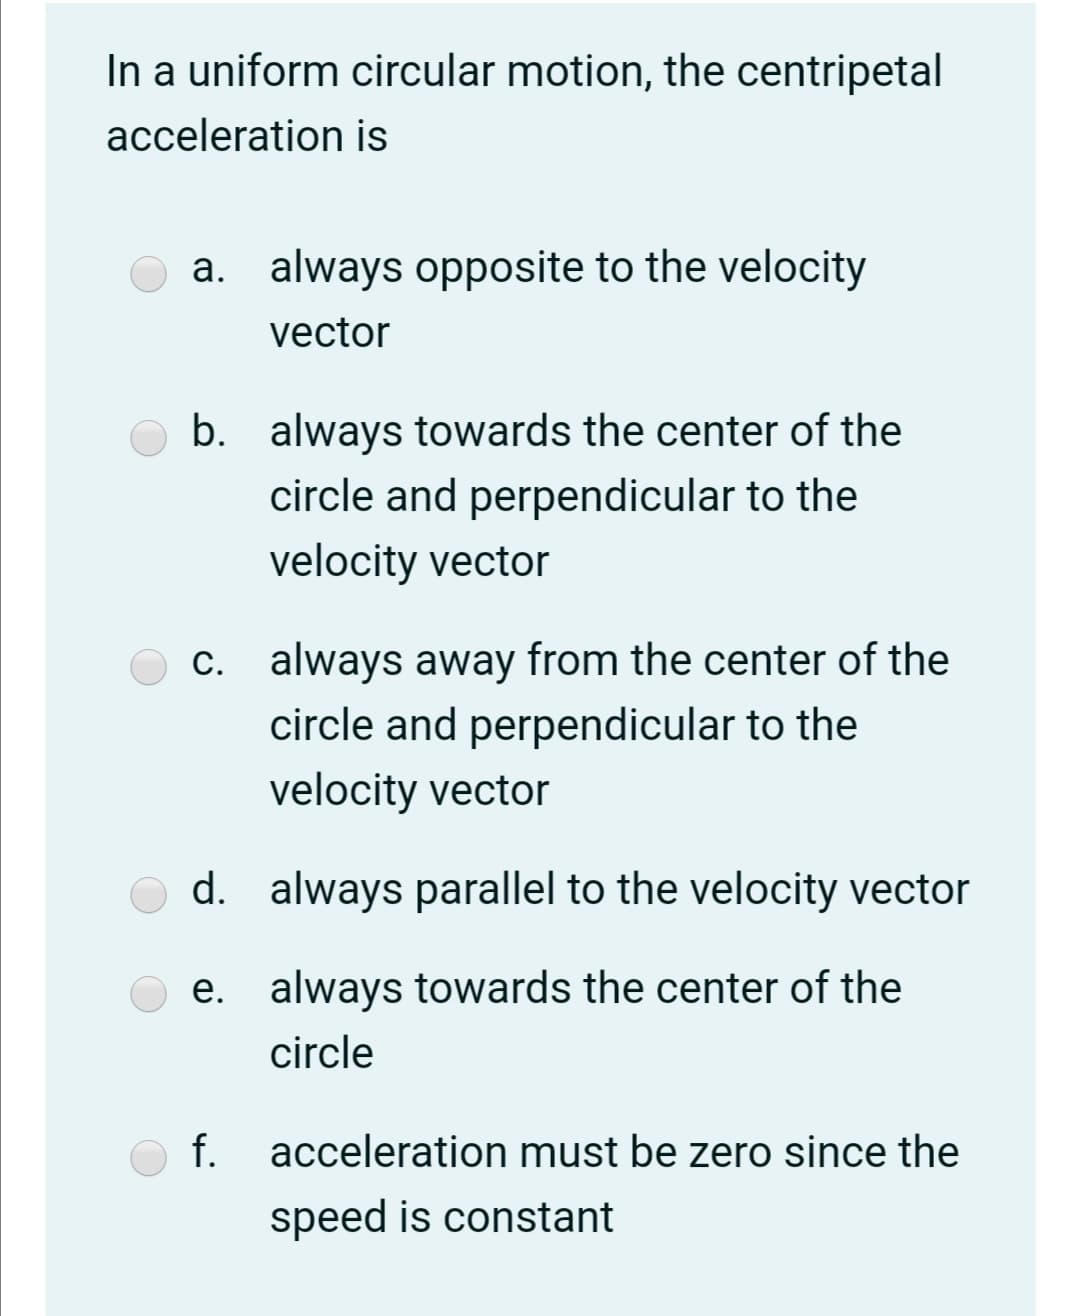 In a uniform circular motion, the centripetal
acceleration is
a. always opposite to the velocity
vector
b. always towards the center of the
circle and perpendicular to the
velocity vector
c. always away from the center of the
circle and perpendicular to the
velocity vector
d. always parallel to the velocity vector
e. always towards the center of the
circle
f.
acceleration must be zero since the
speed is constant
